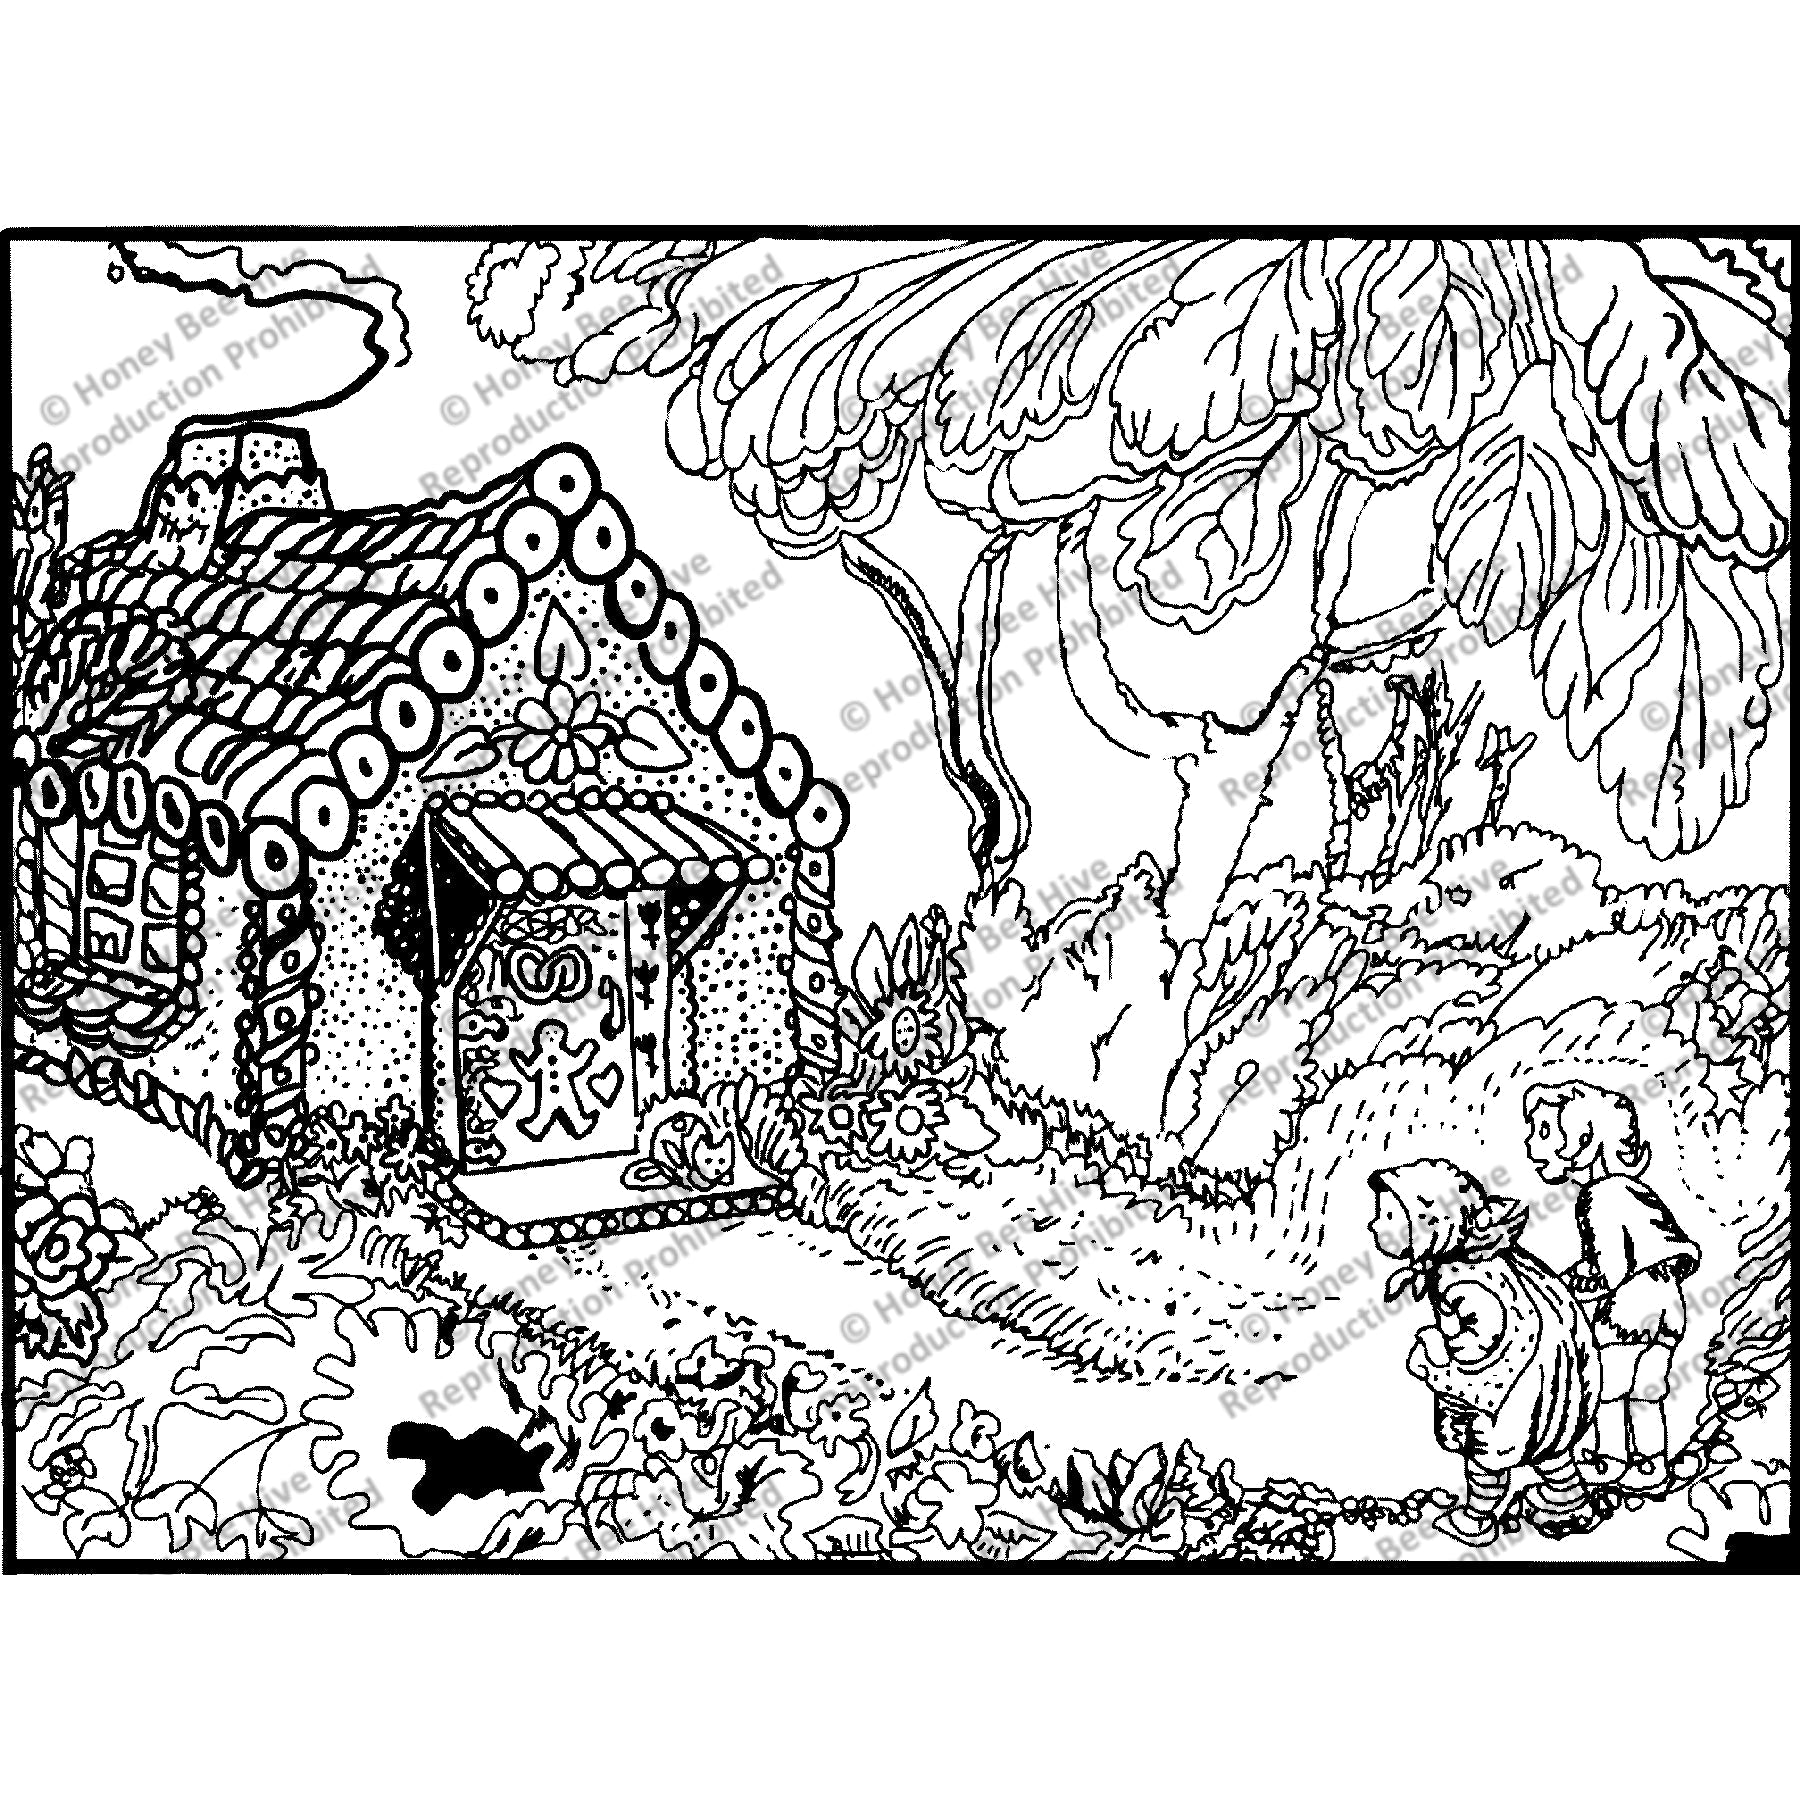 Hansel and Gretel-Hansel and Gretel’s first sighting of the Gingerbread House, ill. Wanda Gag, 1917, rug hooking pattern